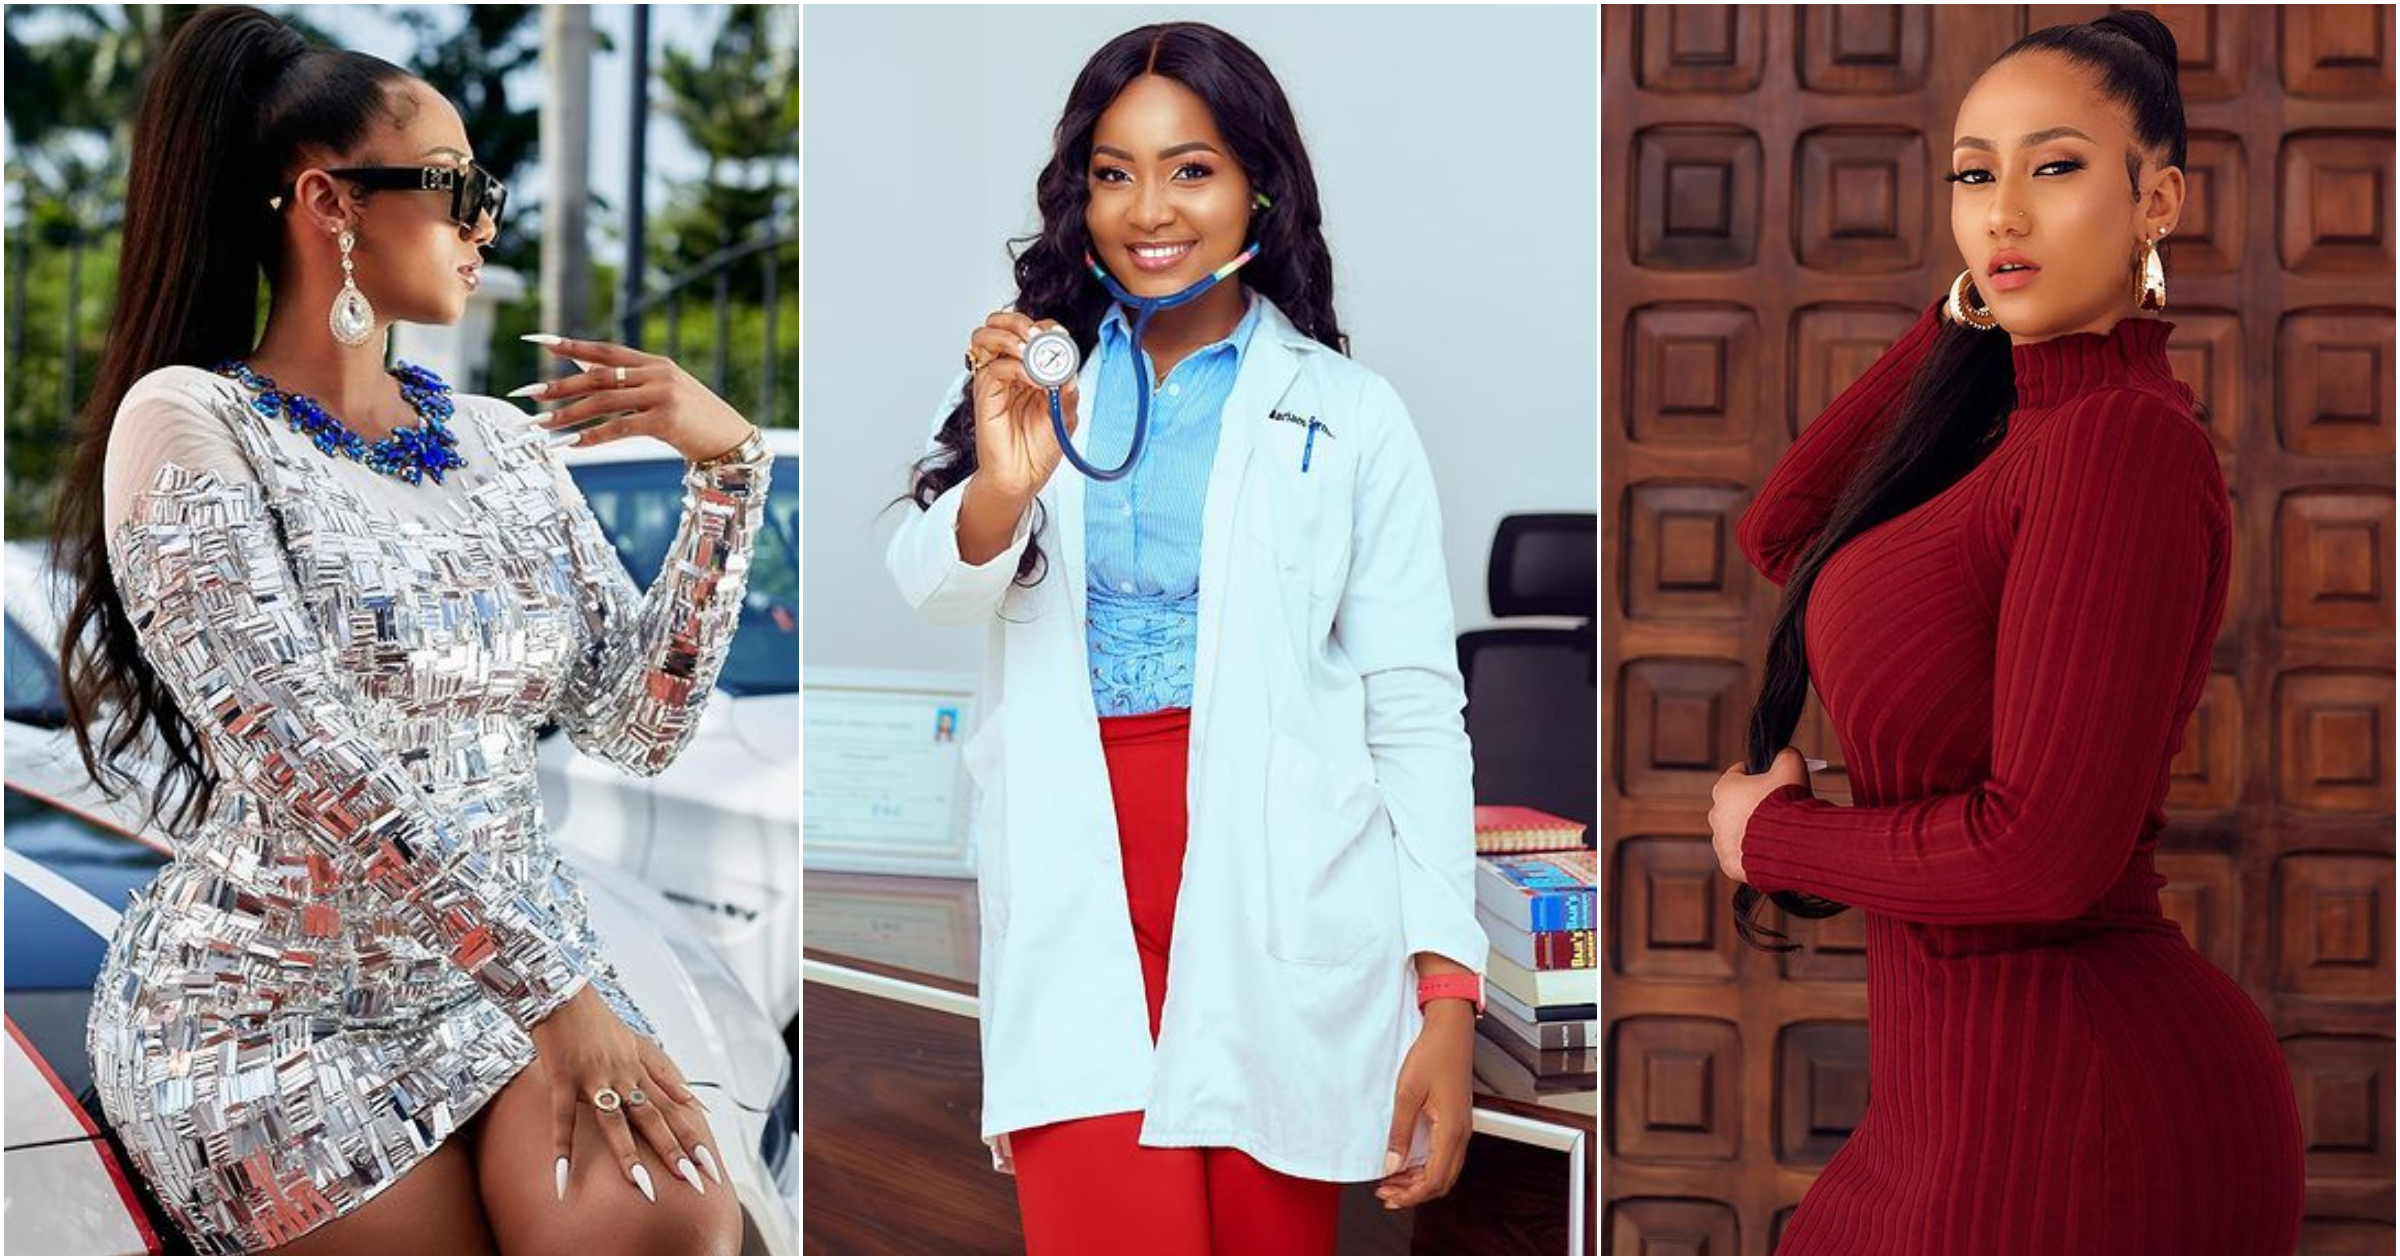 Hajia4Real shares photos of yer younger sister who just graduated as a medical doctor